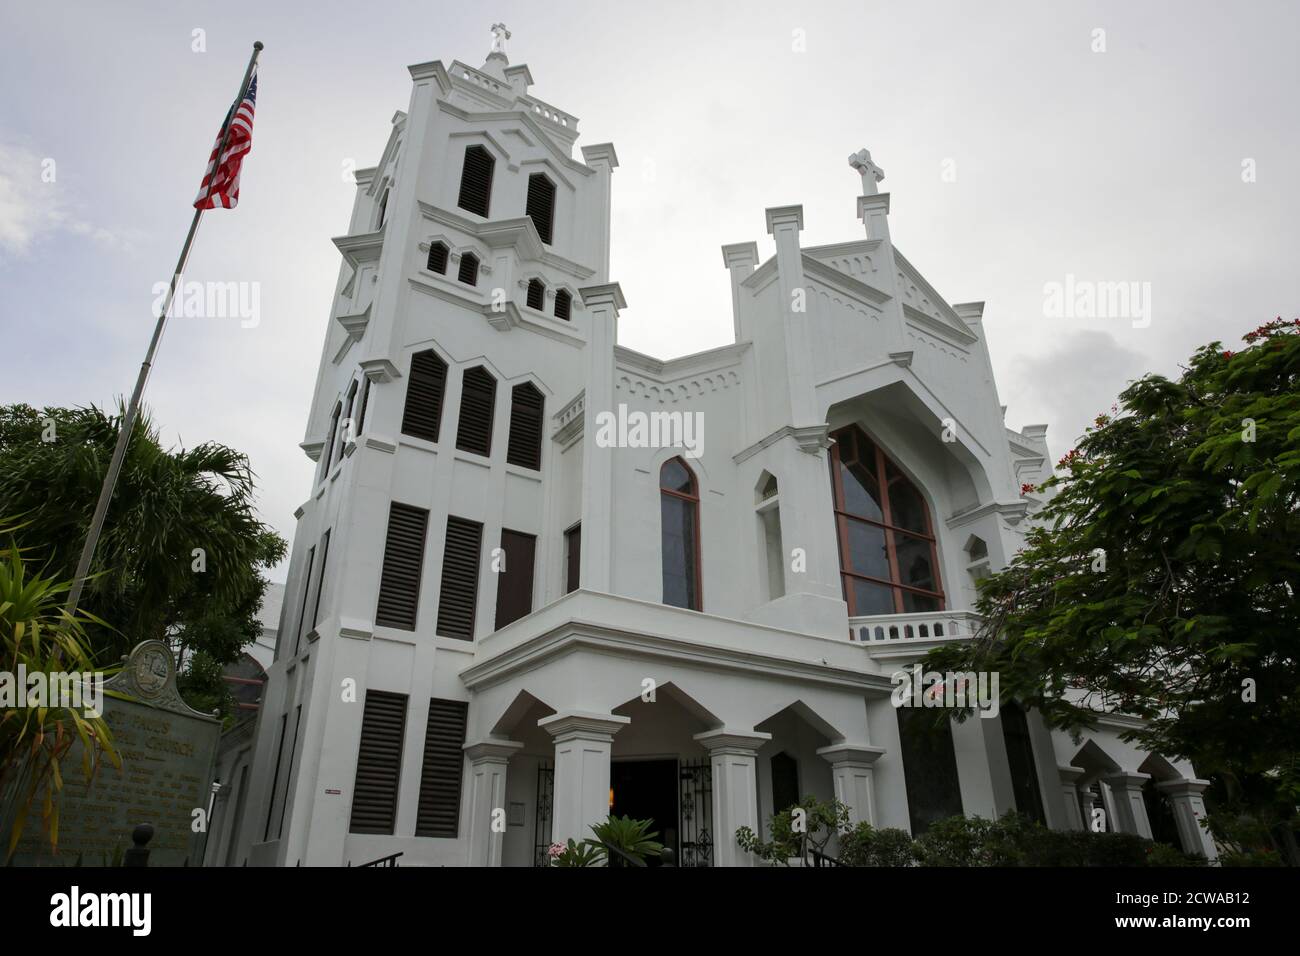 Exterior of the St Paul's Episcopal Church in Key West, Florida Keys, Florida, USA Stock Photo